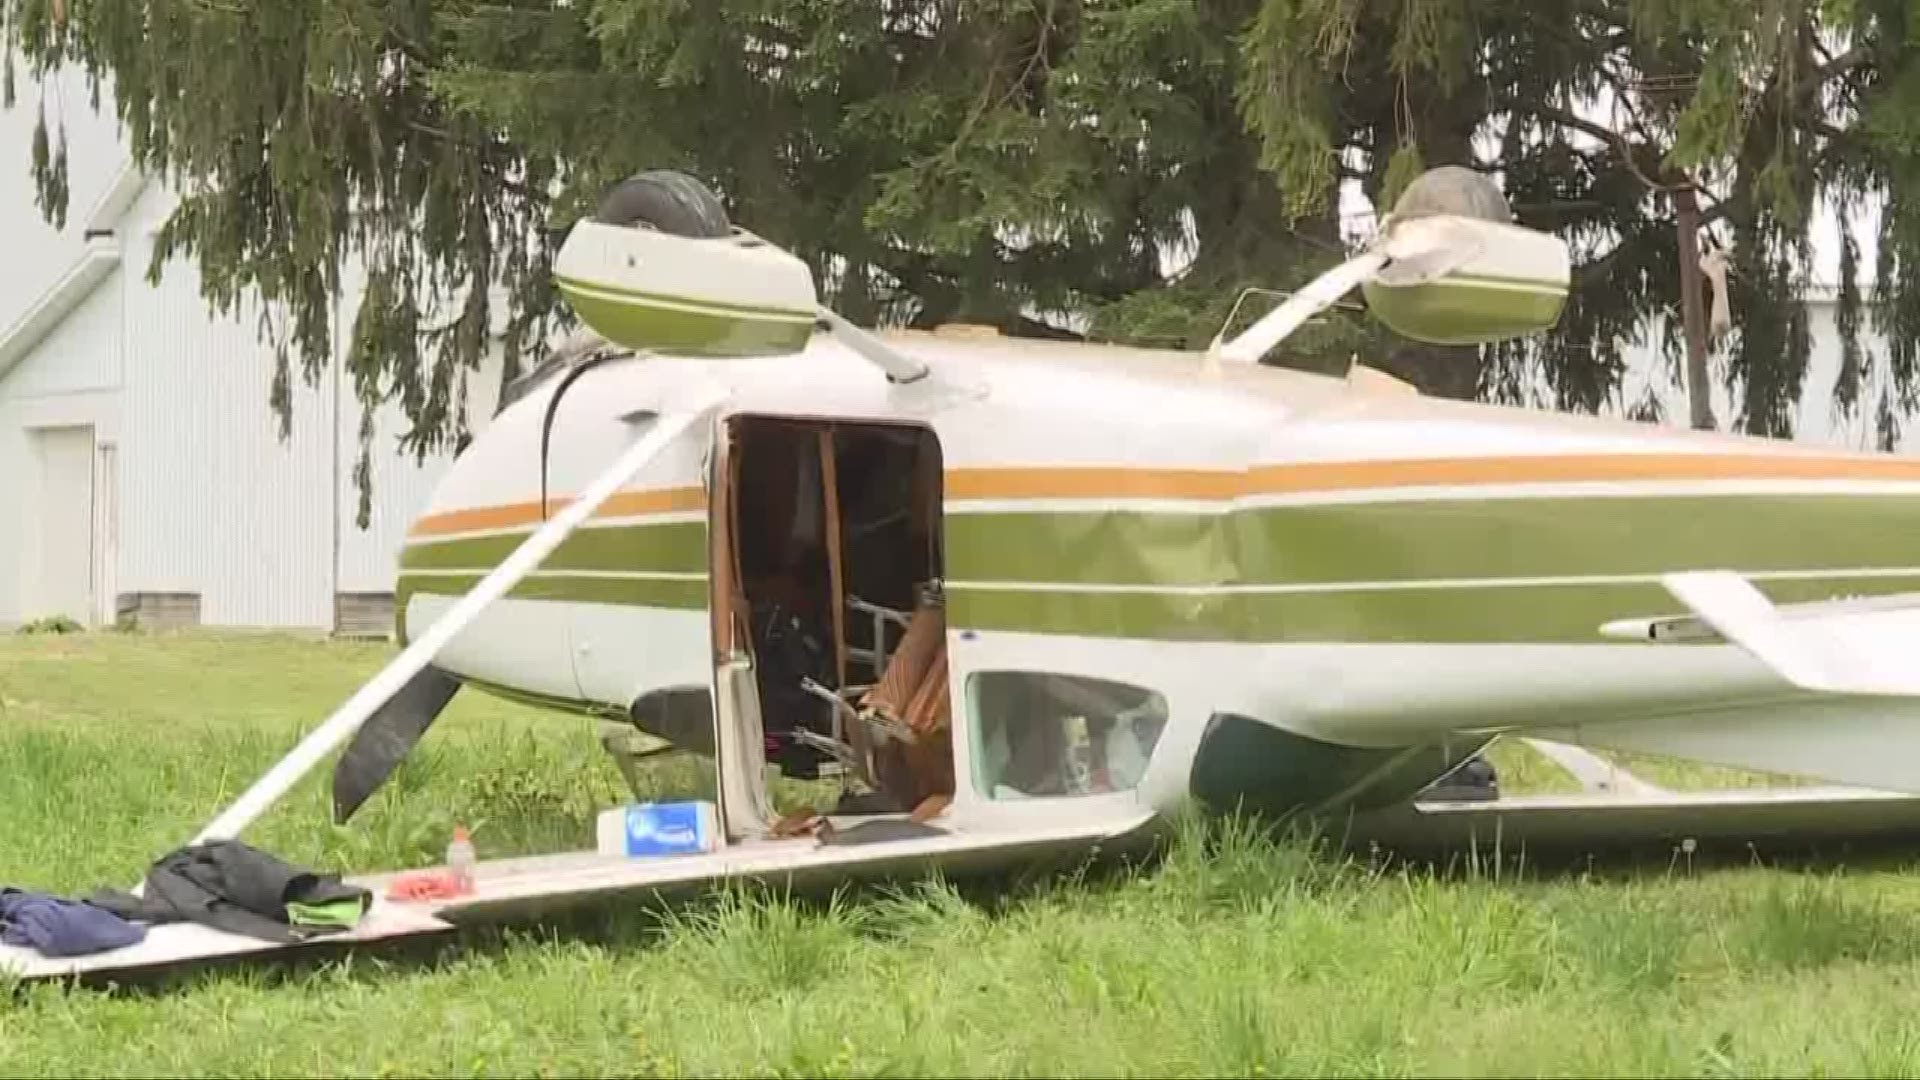 Minor injuries reported after small plane crashes in Wayne County